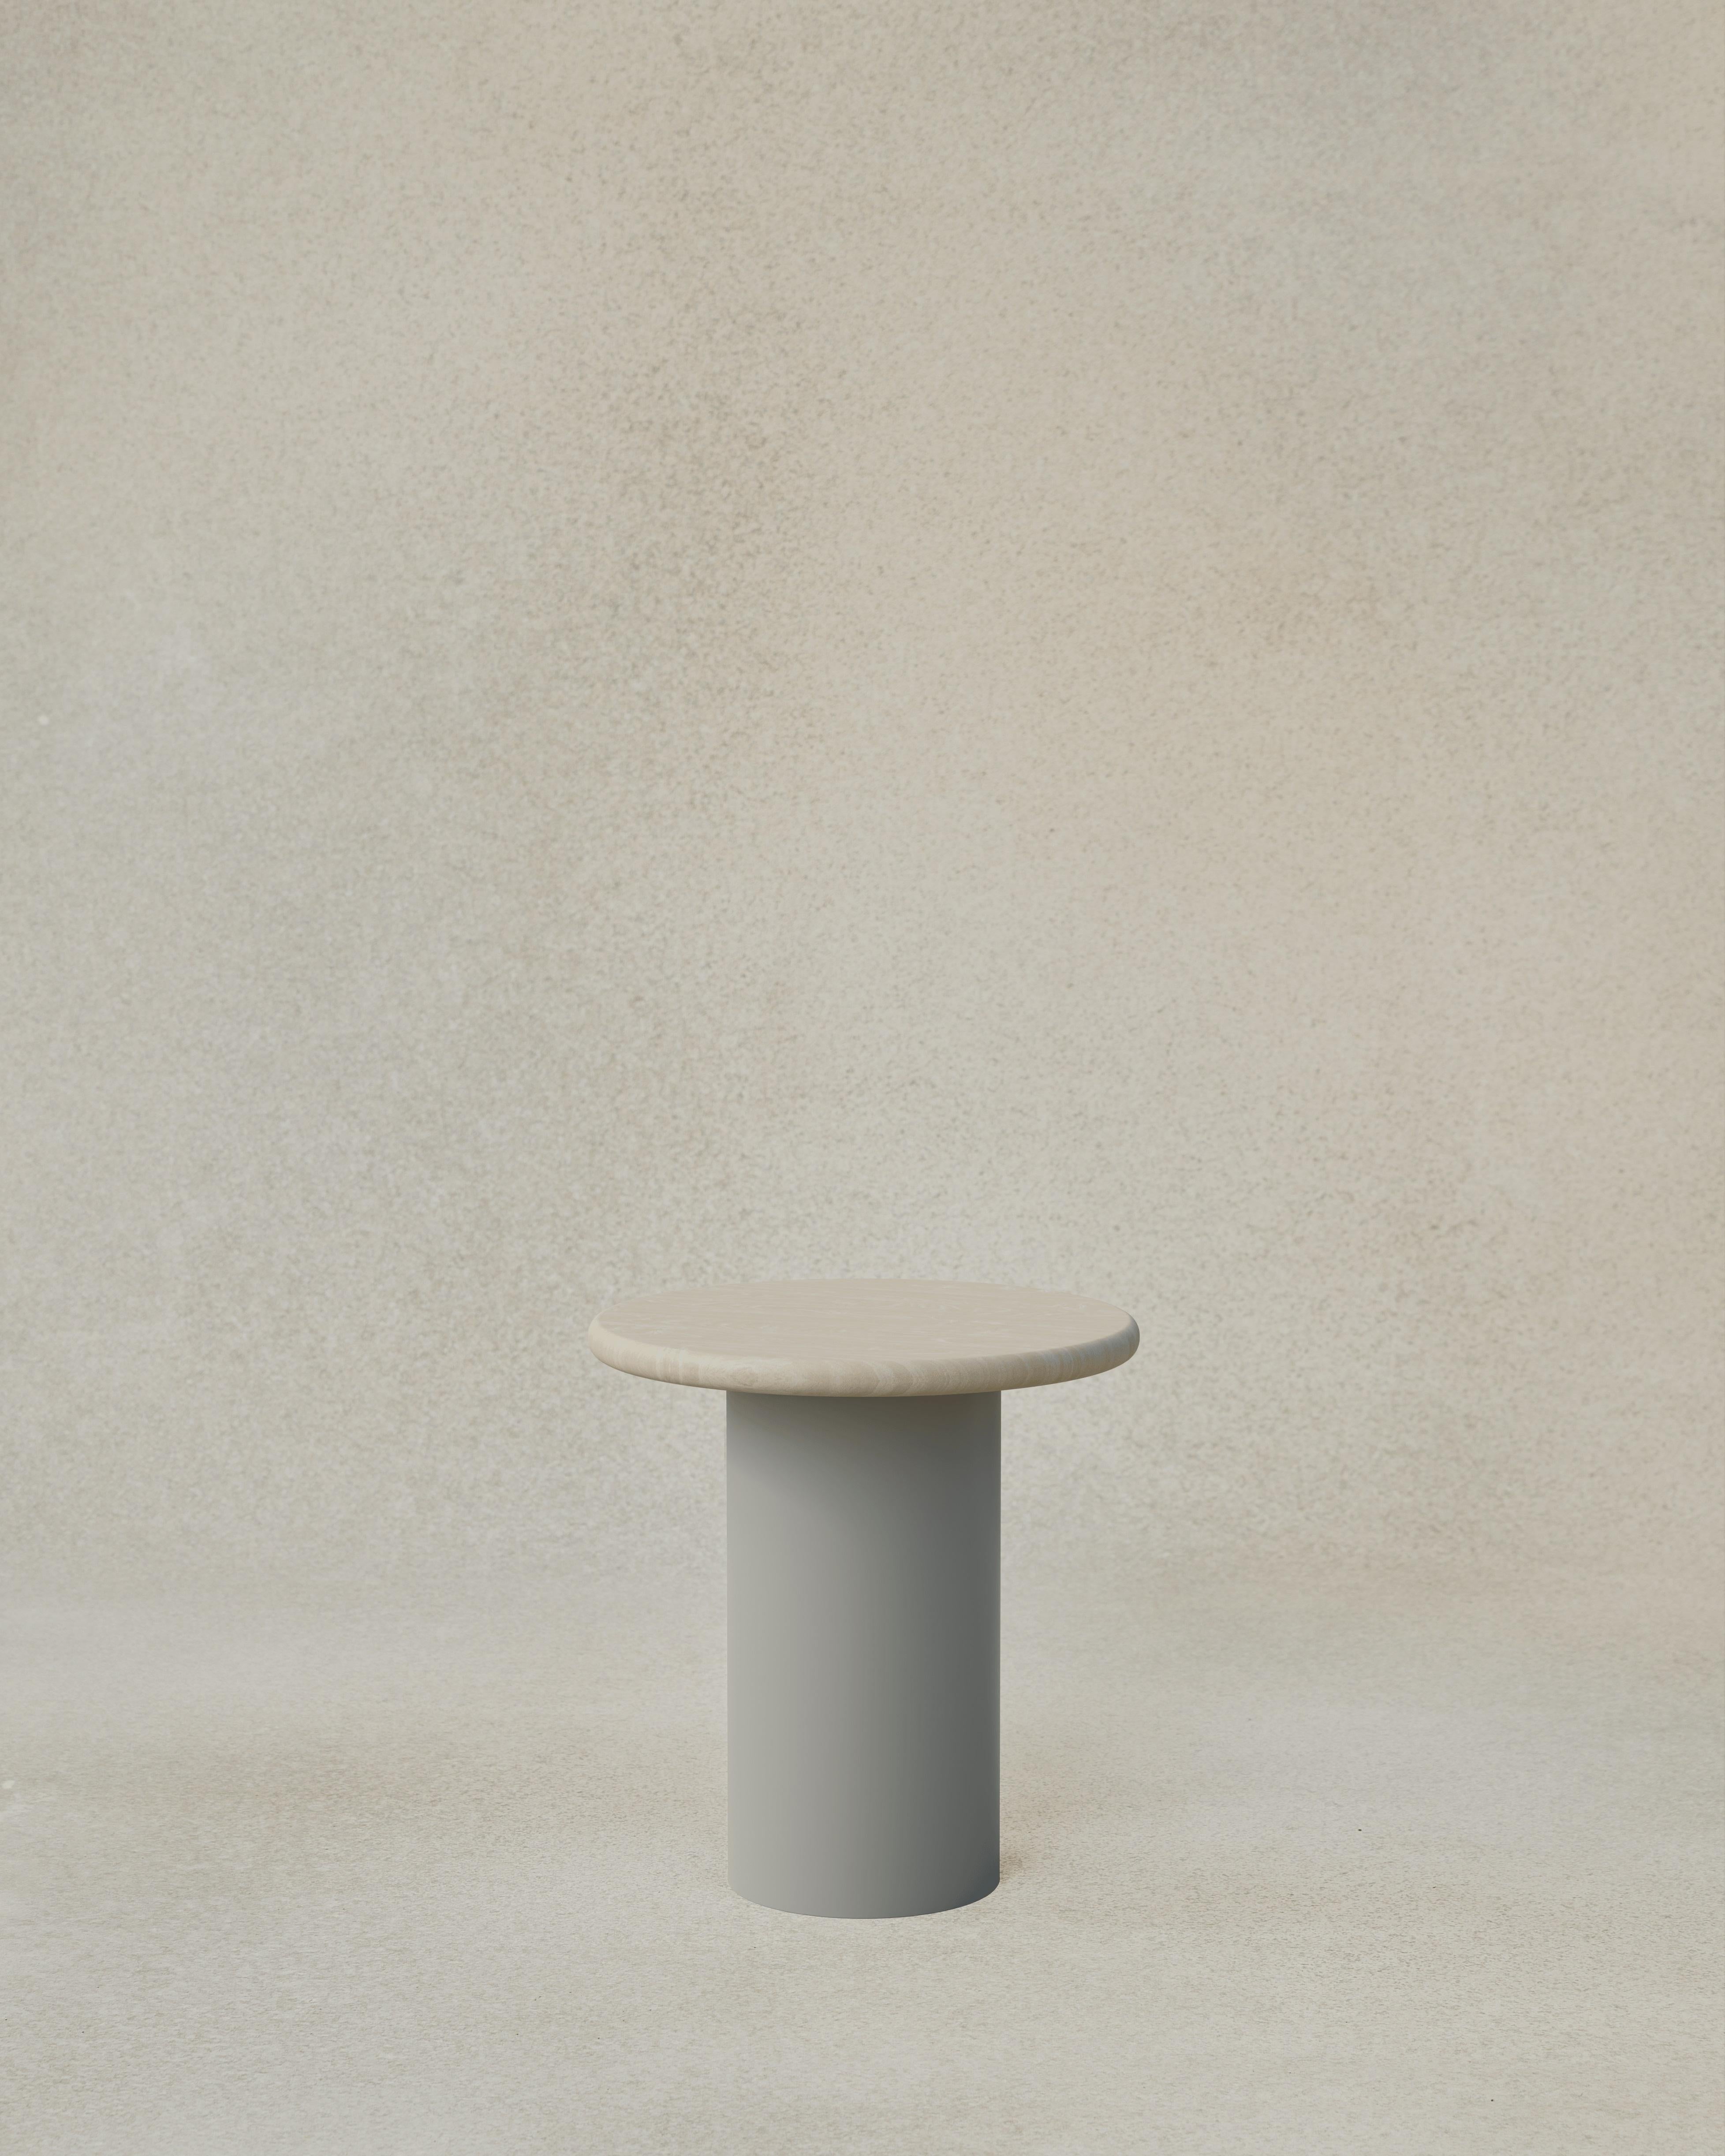 The Raindrop 400 is the second to smallest Side Table, perfect to pair with a 800 or 1000 Raindrop, and now available in a range of finishes to suit any interior or style. The raindrops nestle together to form a cascading series of tables in height